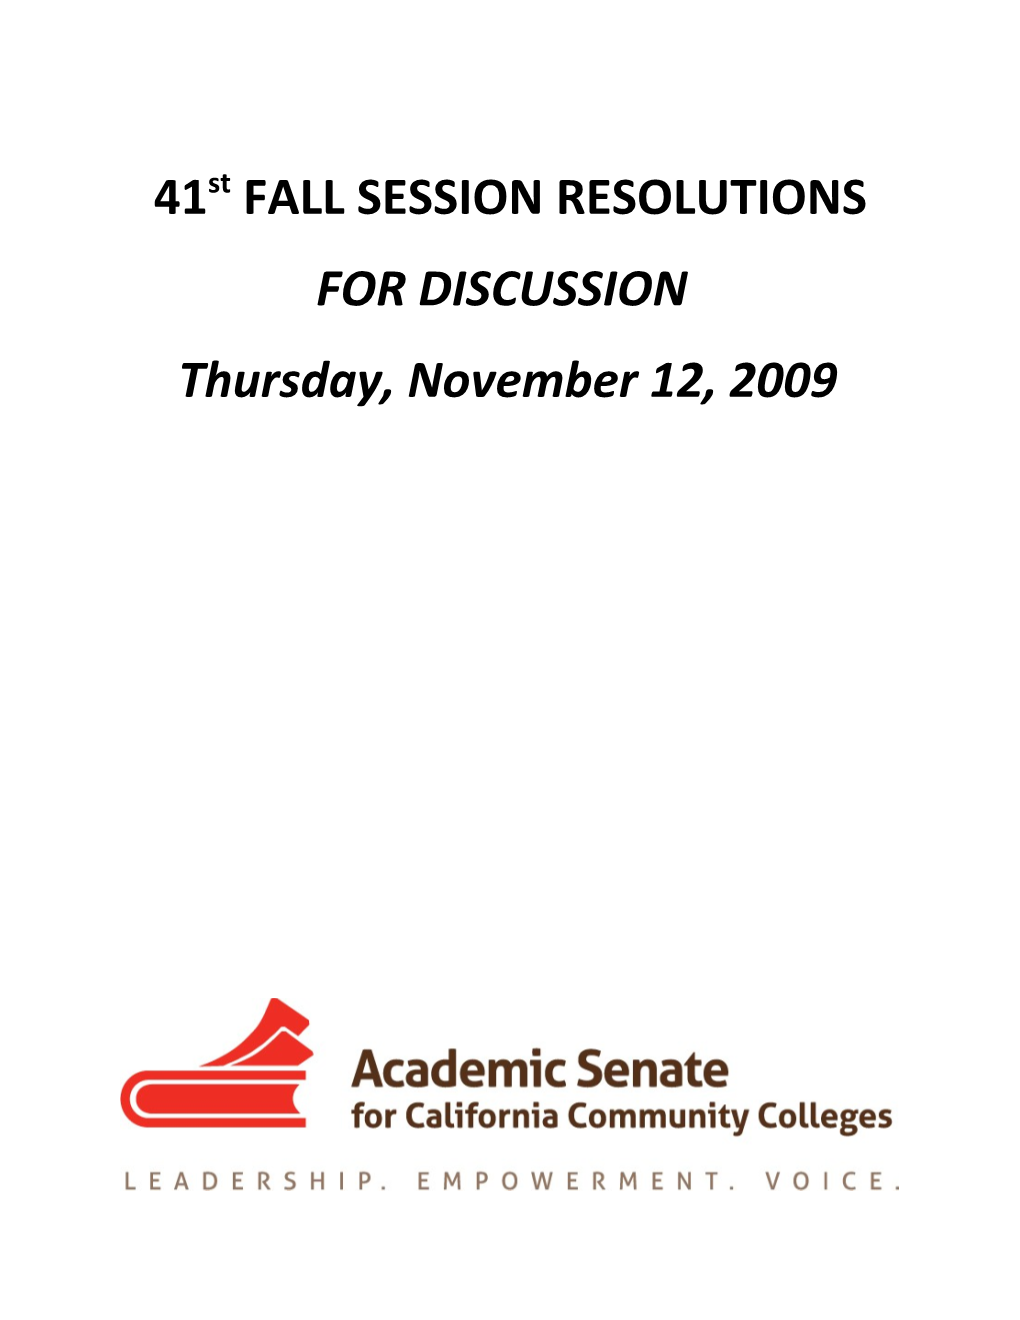 Resolutions for Fall 2009